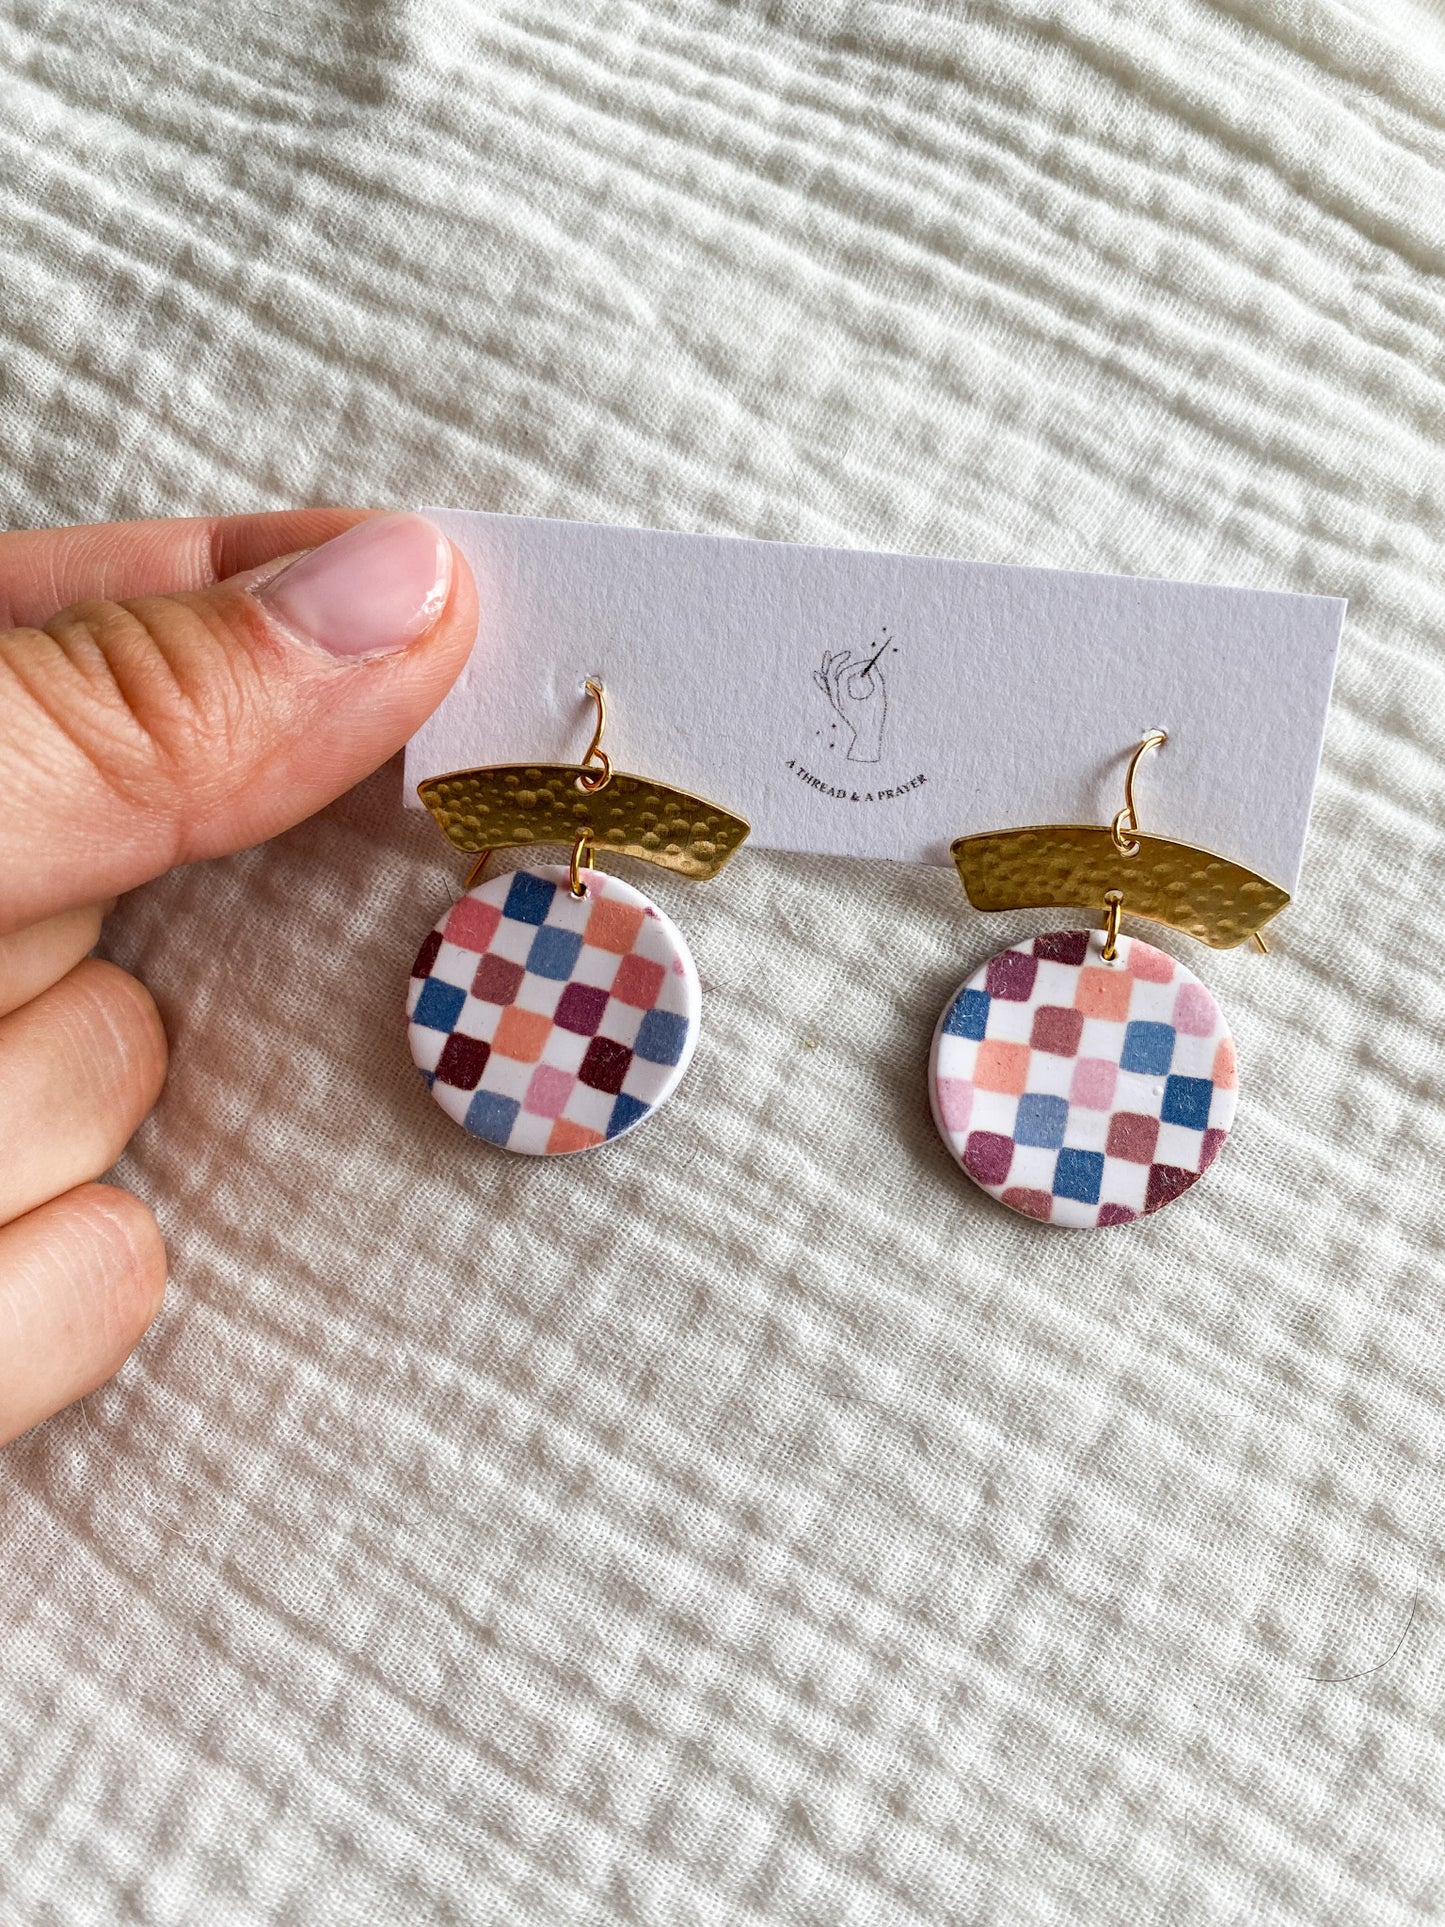 Retro Checkered Clay Earrings | Groovy Baby | Retro Style Earrings | Multi Colored Accessories | Cute and Trendy